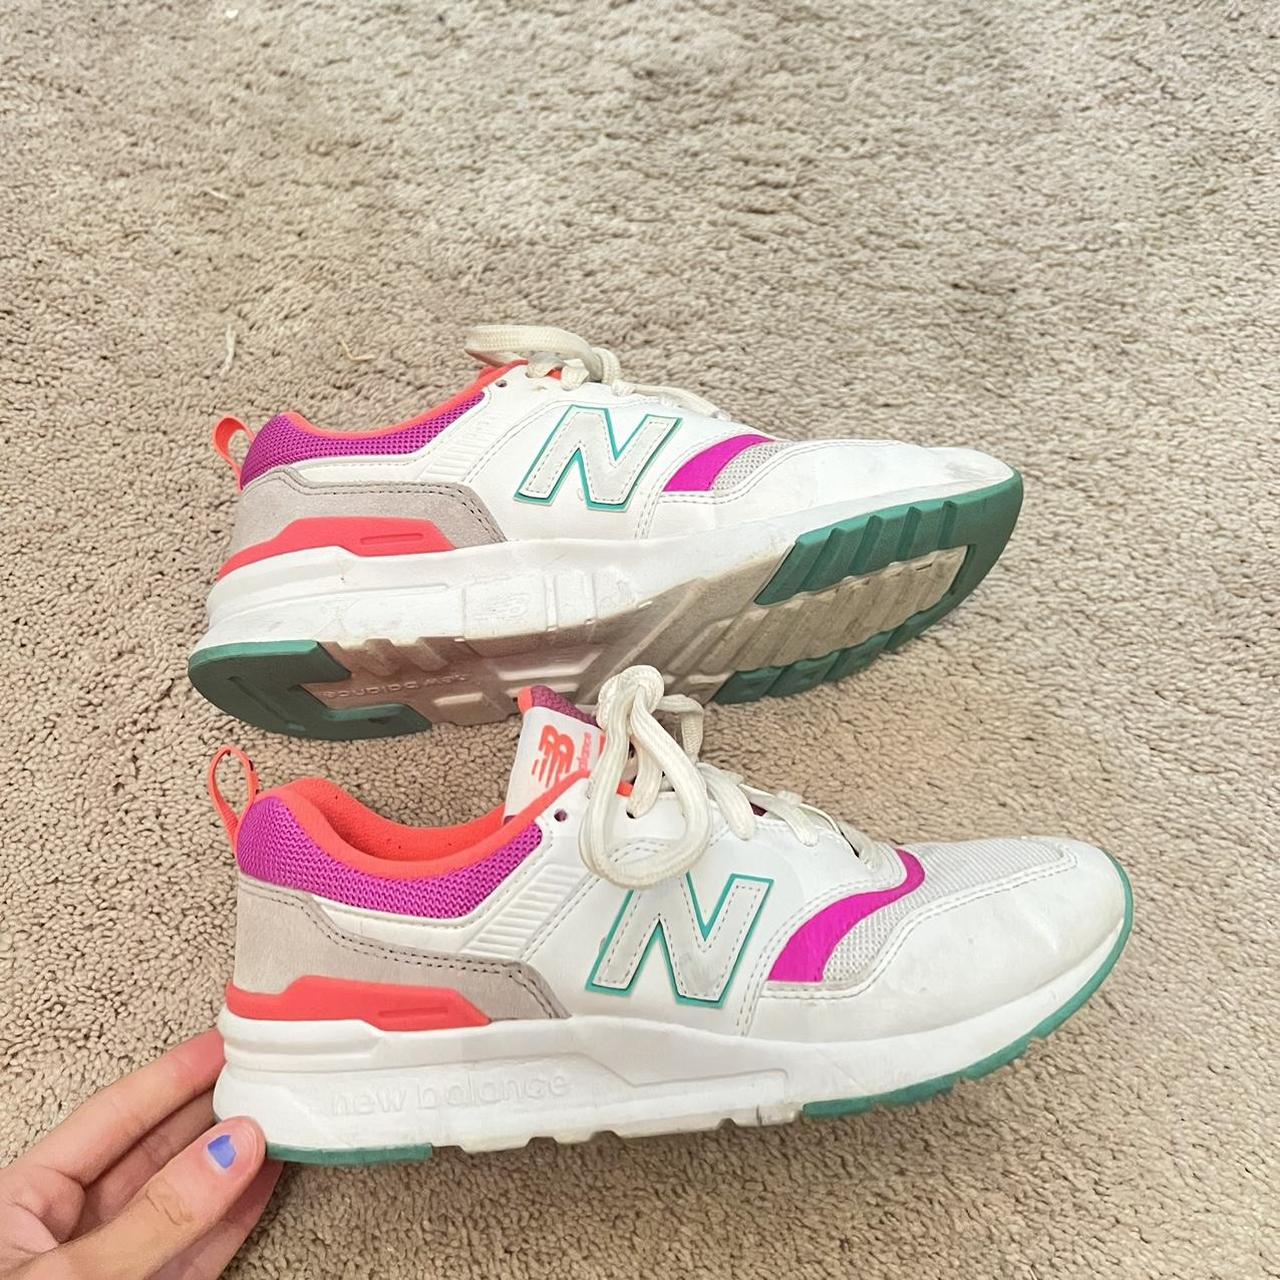 New Balance Women's White and Pink Trainers